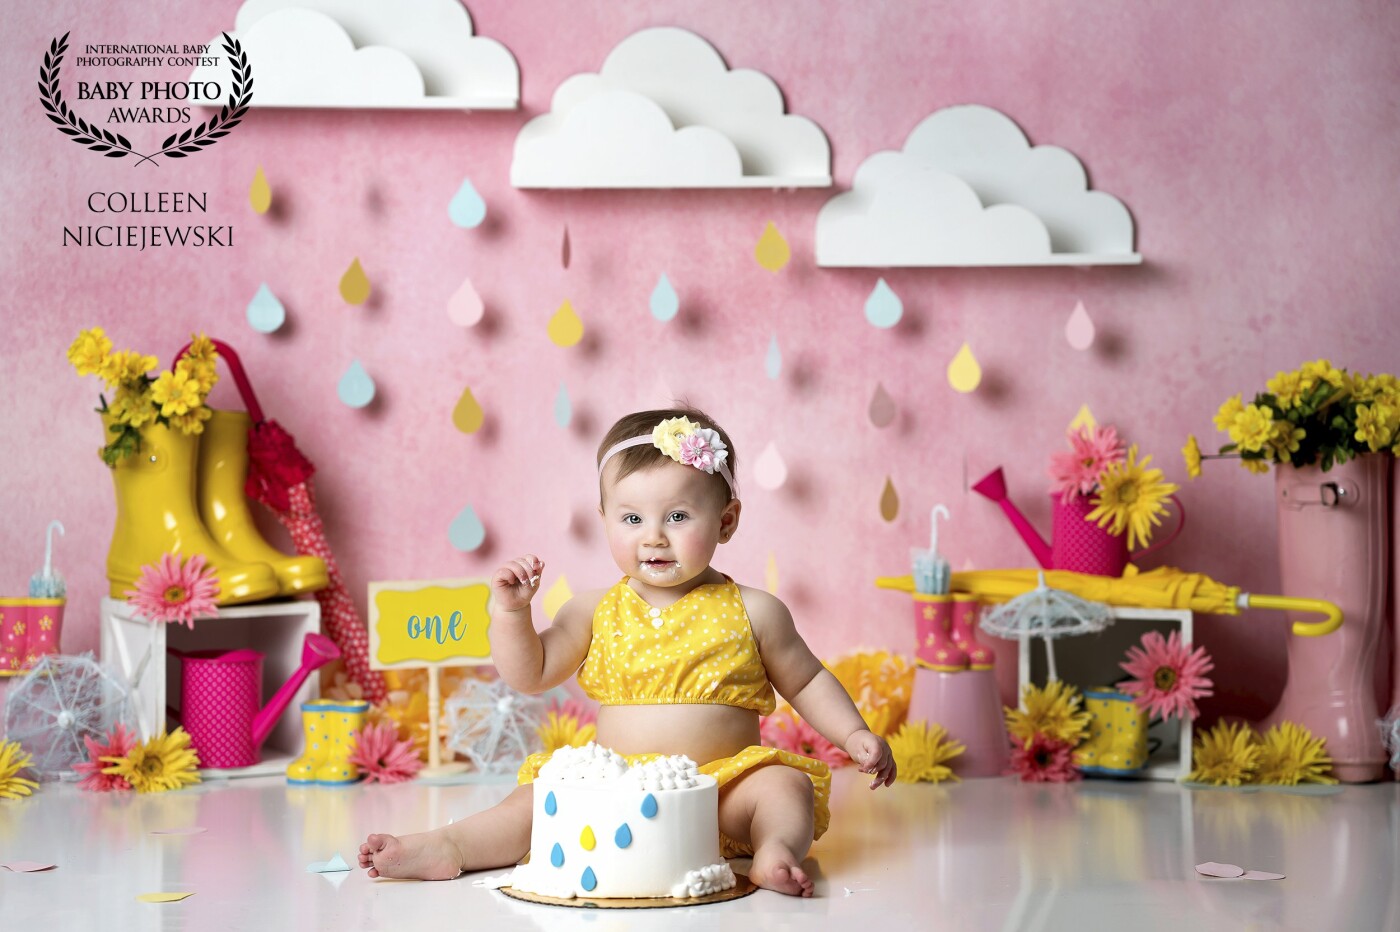 April showers bring May flowers... and this little girl was the sunshine that pulled it all together. When clients give me a blank canvas and allow me to do what I do best - it always makes for the most fun sets! Creating unique set designs for each one of my clients is what I love most and this set is definitely an all-time favorite of mine. 